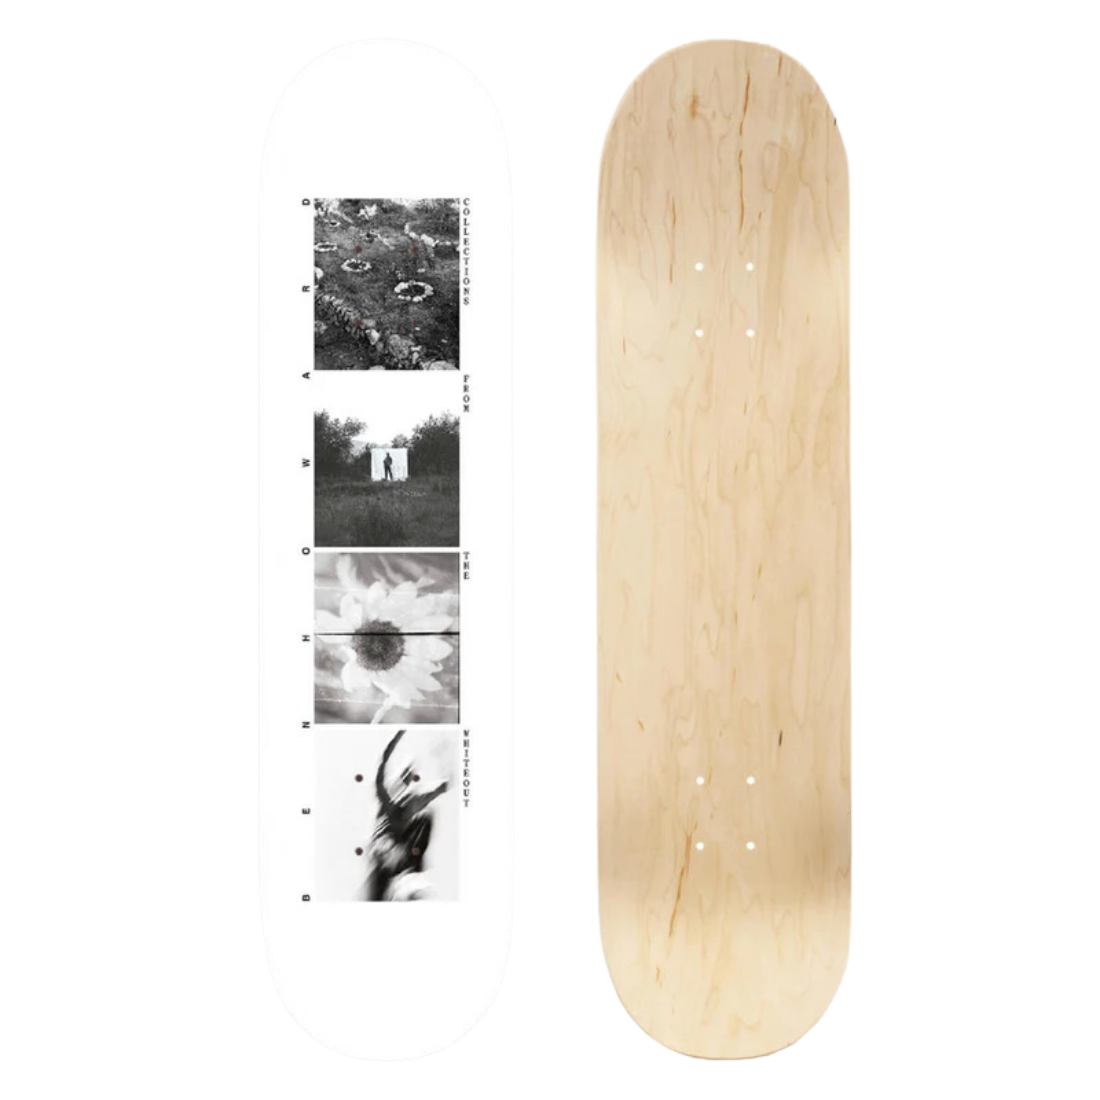 Ben Howard - Collections From The Whiteout: White Skatedeck 8.25"